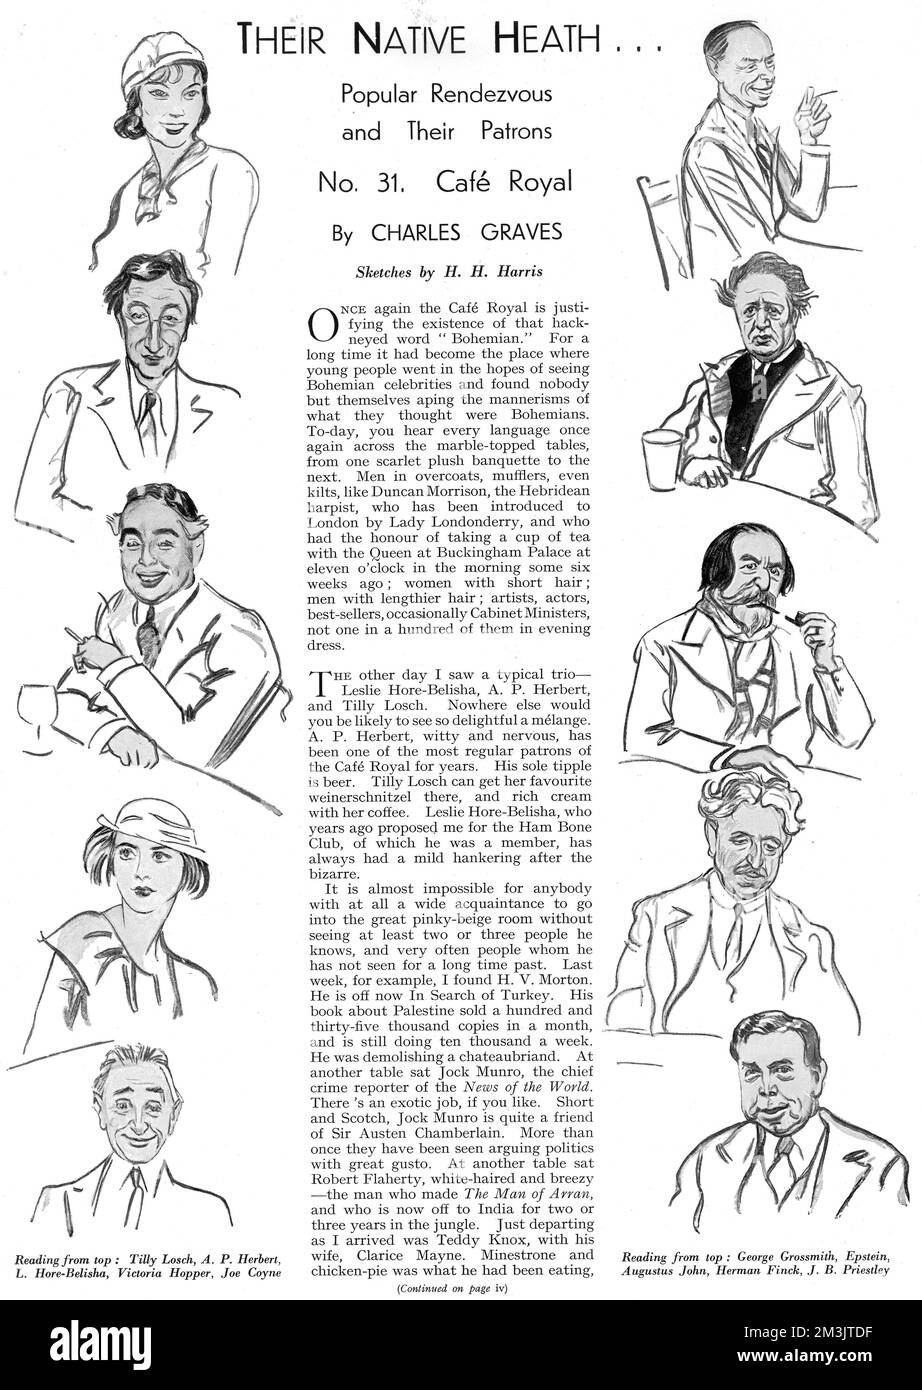 Sketches by H. H. Harris of various well-known artists, writers and celebrities of the 1930's who were regular patrons of the Cafe Royal in Regent Street, London. Left from top: Tilly Losch (dancer and actress), A. P. Herbert (writer and wit), L. Hore-Belisha (M.P responsible for the introduction of the driving test, 'Belisha Beacons' and conscription during World War II), Victoria Hopper (actress) and Joe Coyne (actor). Right from top: George Grossmith (actor, manager and playwright), Epstein (artist and sculptor), Augustus John (artist), Herman Finck (composer) and J. B. Priestley (author Stock Photo